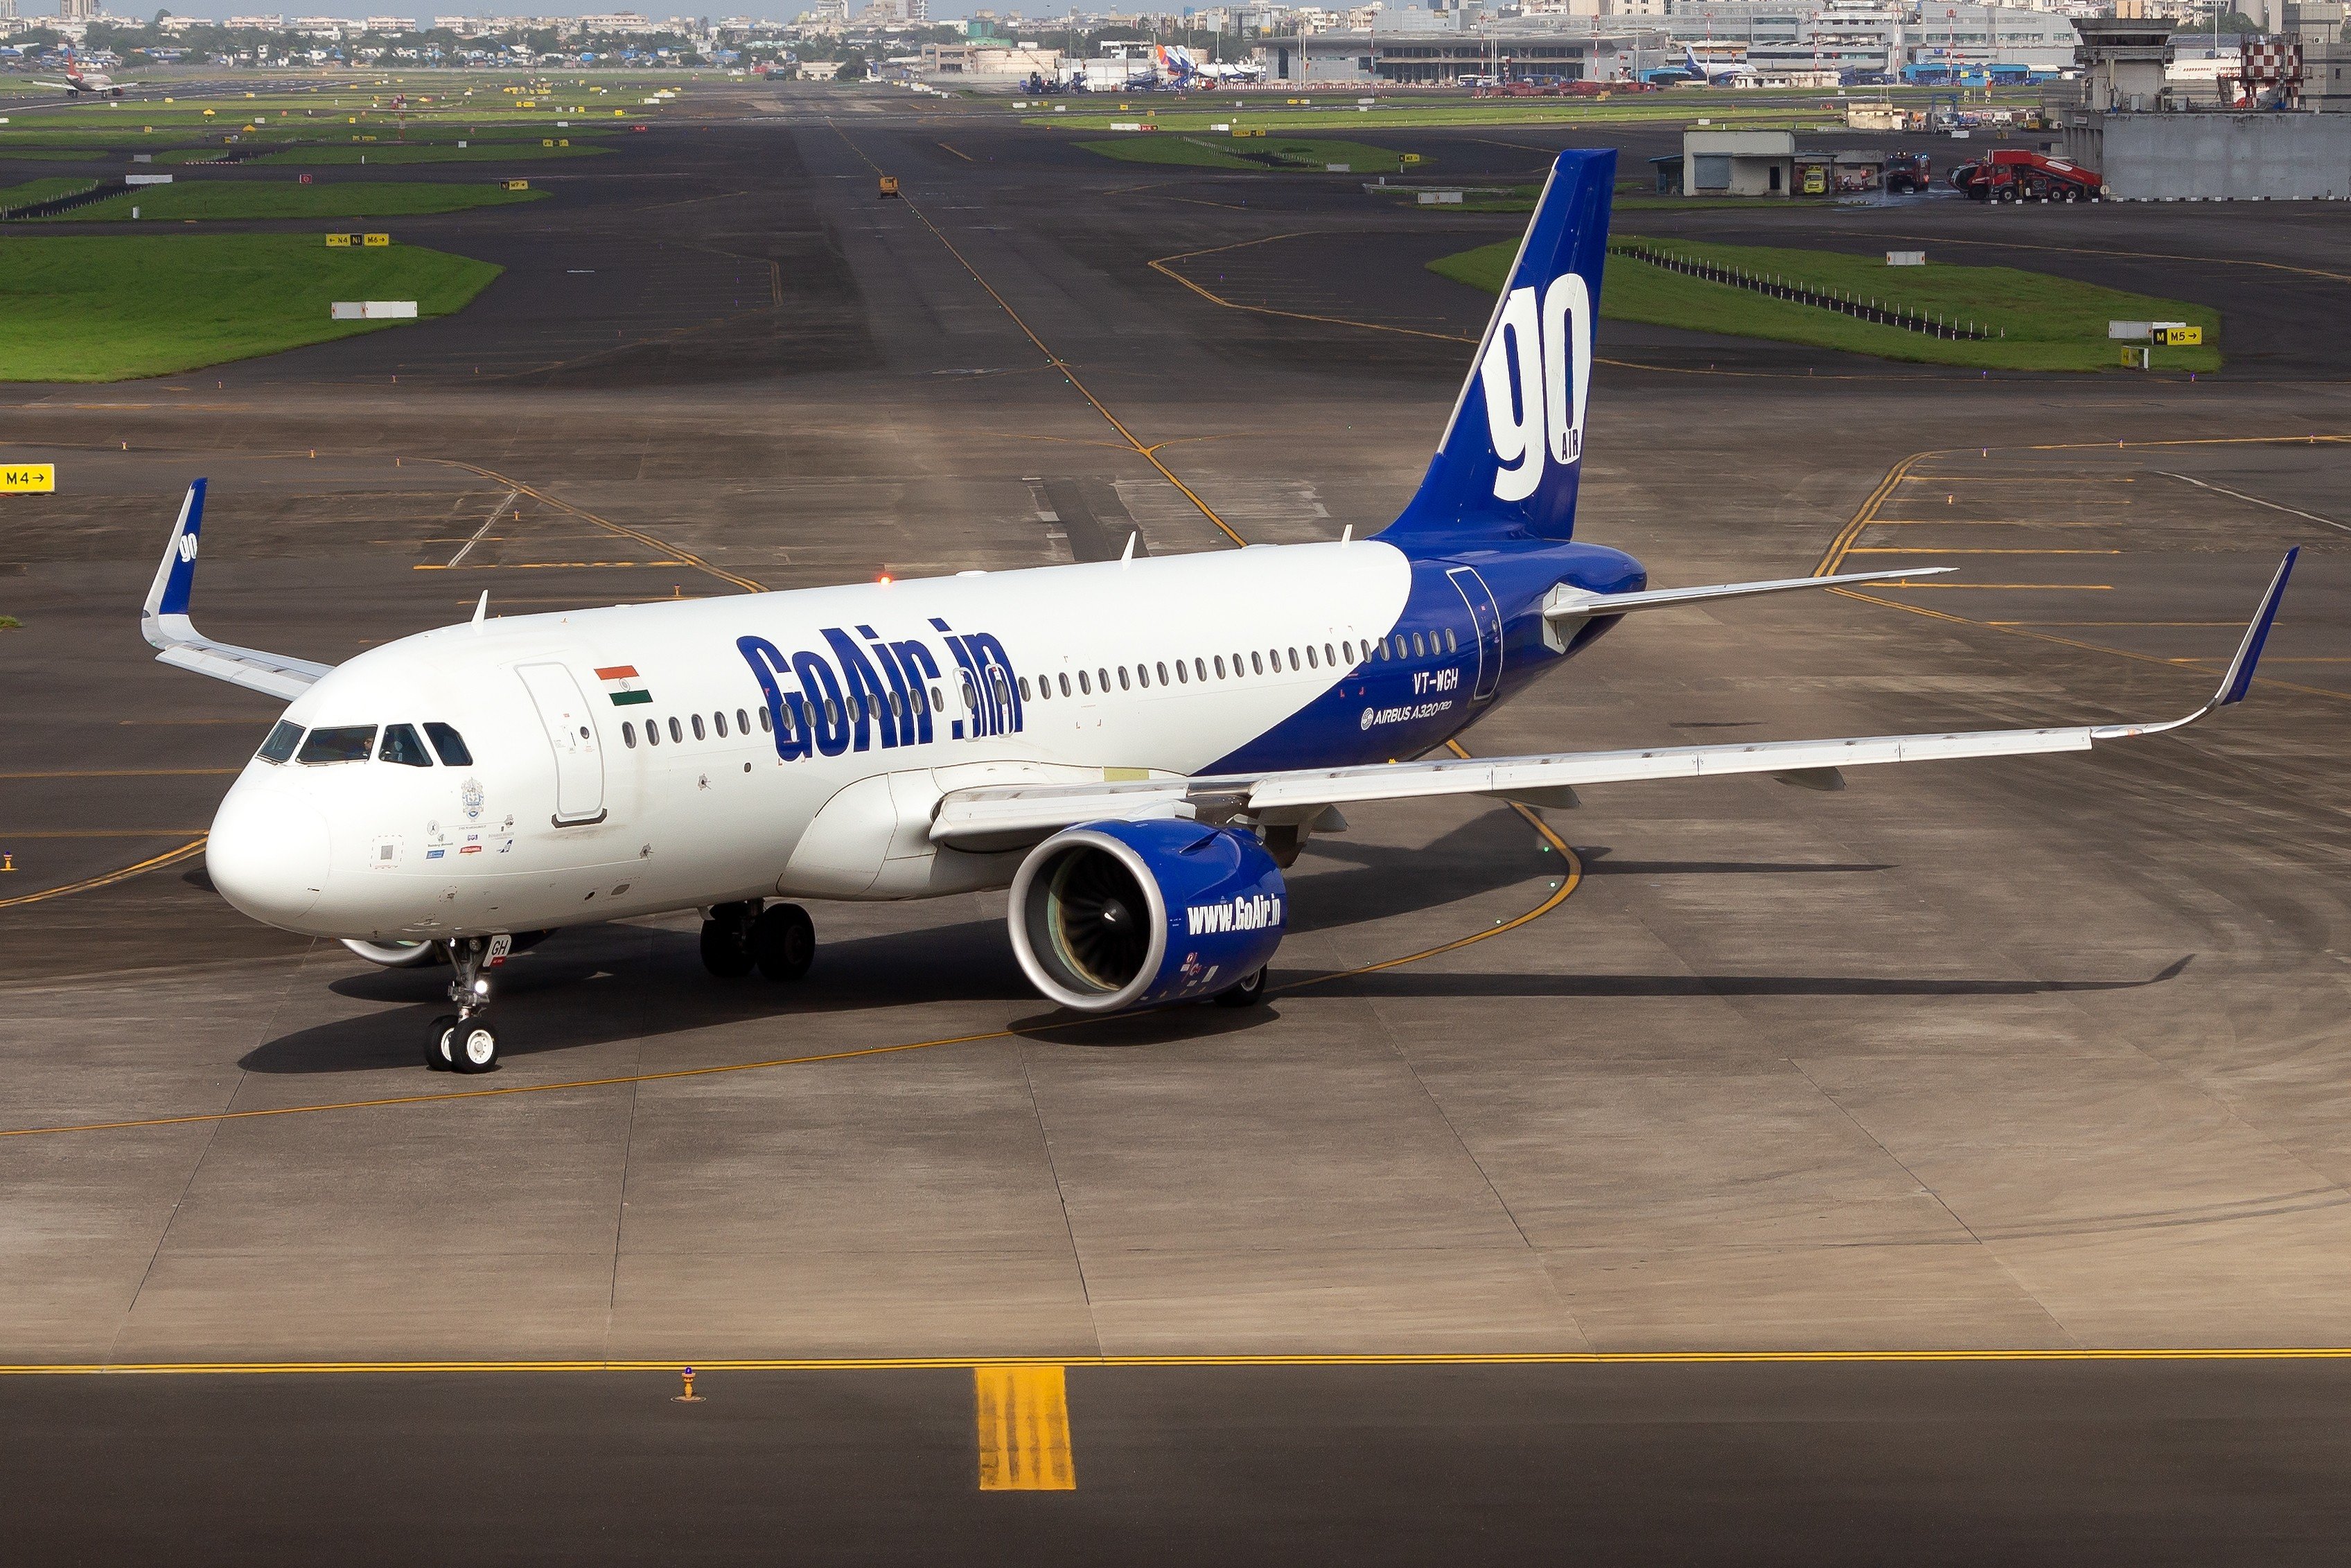 A Go Air plane at Mumbai Airport on August 27, 2022. Photo: Shutterstock
